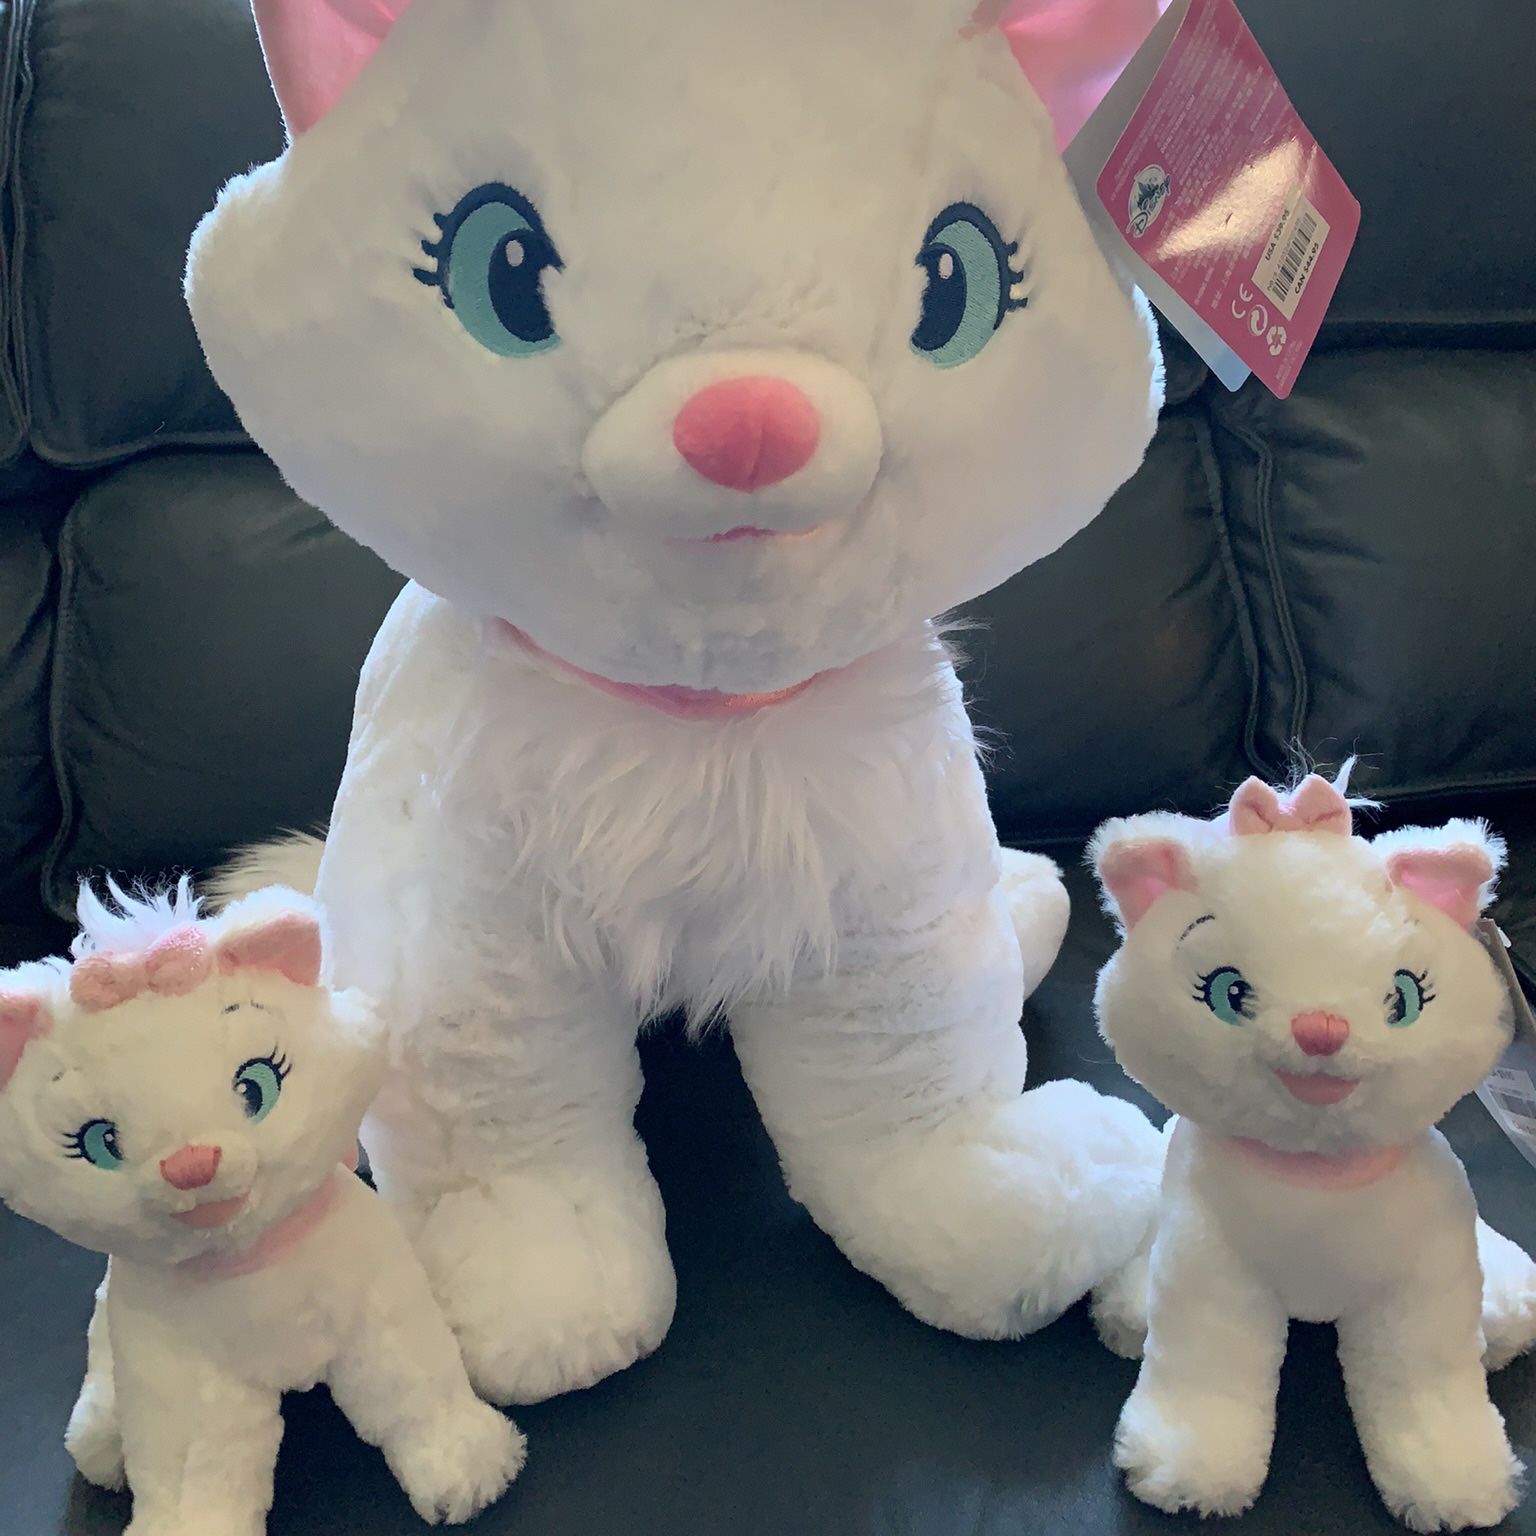 Disney Store The Aristocats Stuffed Animal Plush Marie 12 Super Long Tail  White for Sale in Simi Valley, CA - OfferUp